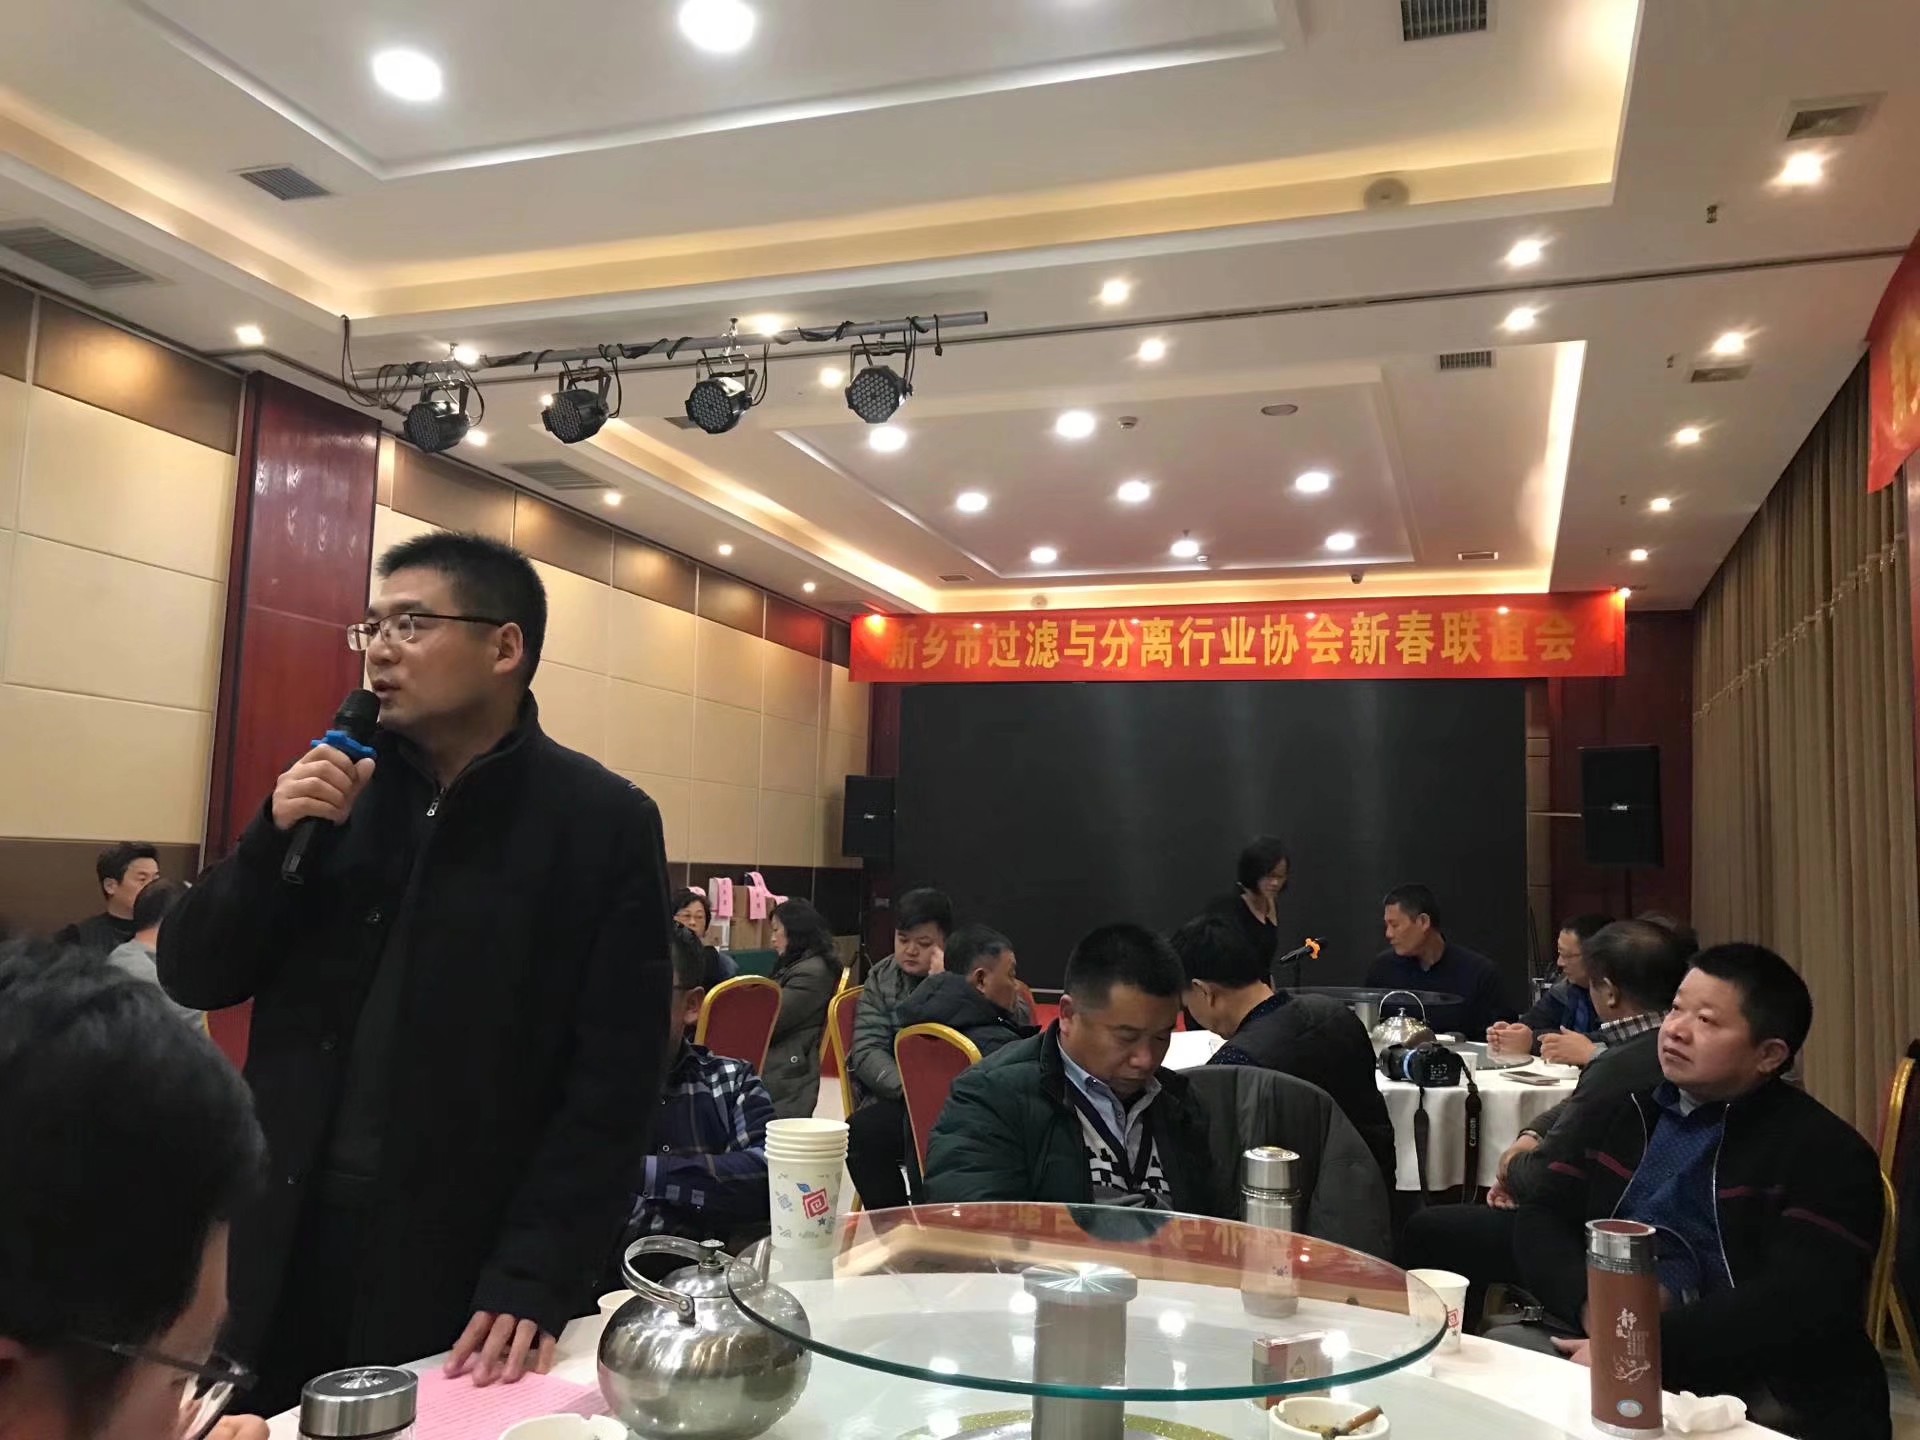 Warm congratulations for successful of annual meeting of  Xinxiang  Filtration and Separation Association!